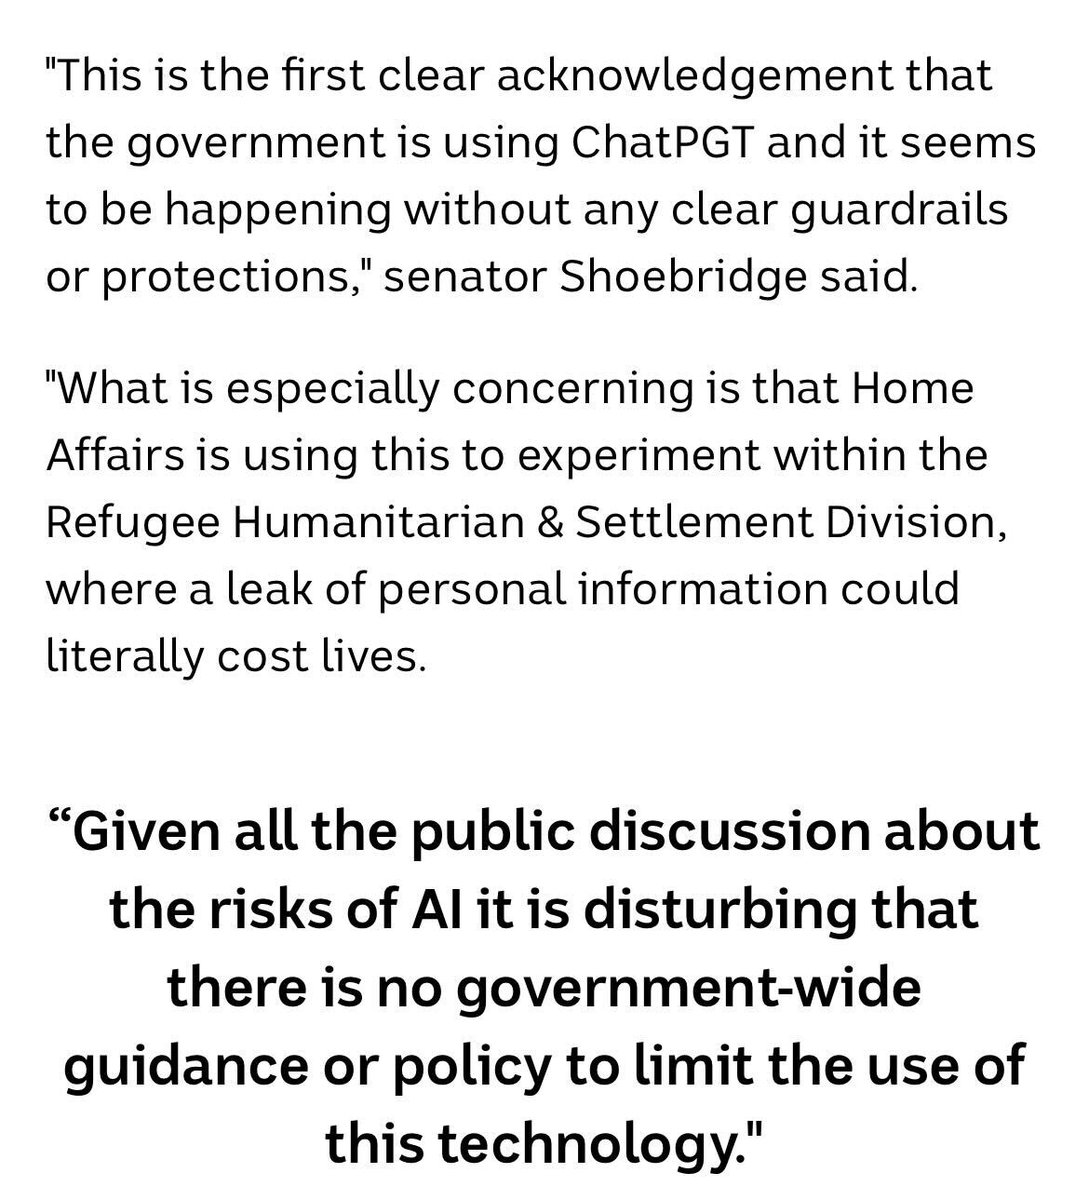 DISTURBING: The Home Affairs dept is experimenting with using ChatGPT AI in several of its divisions, including its refugee, humanitarian and settlement team, & in cyber security 🤯 My comments to @jcobevans